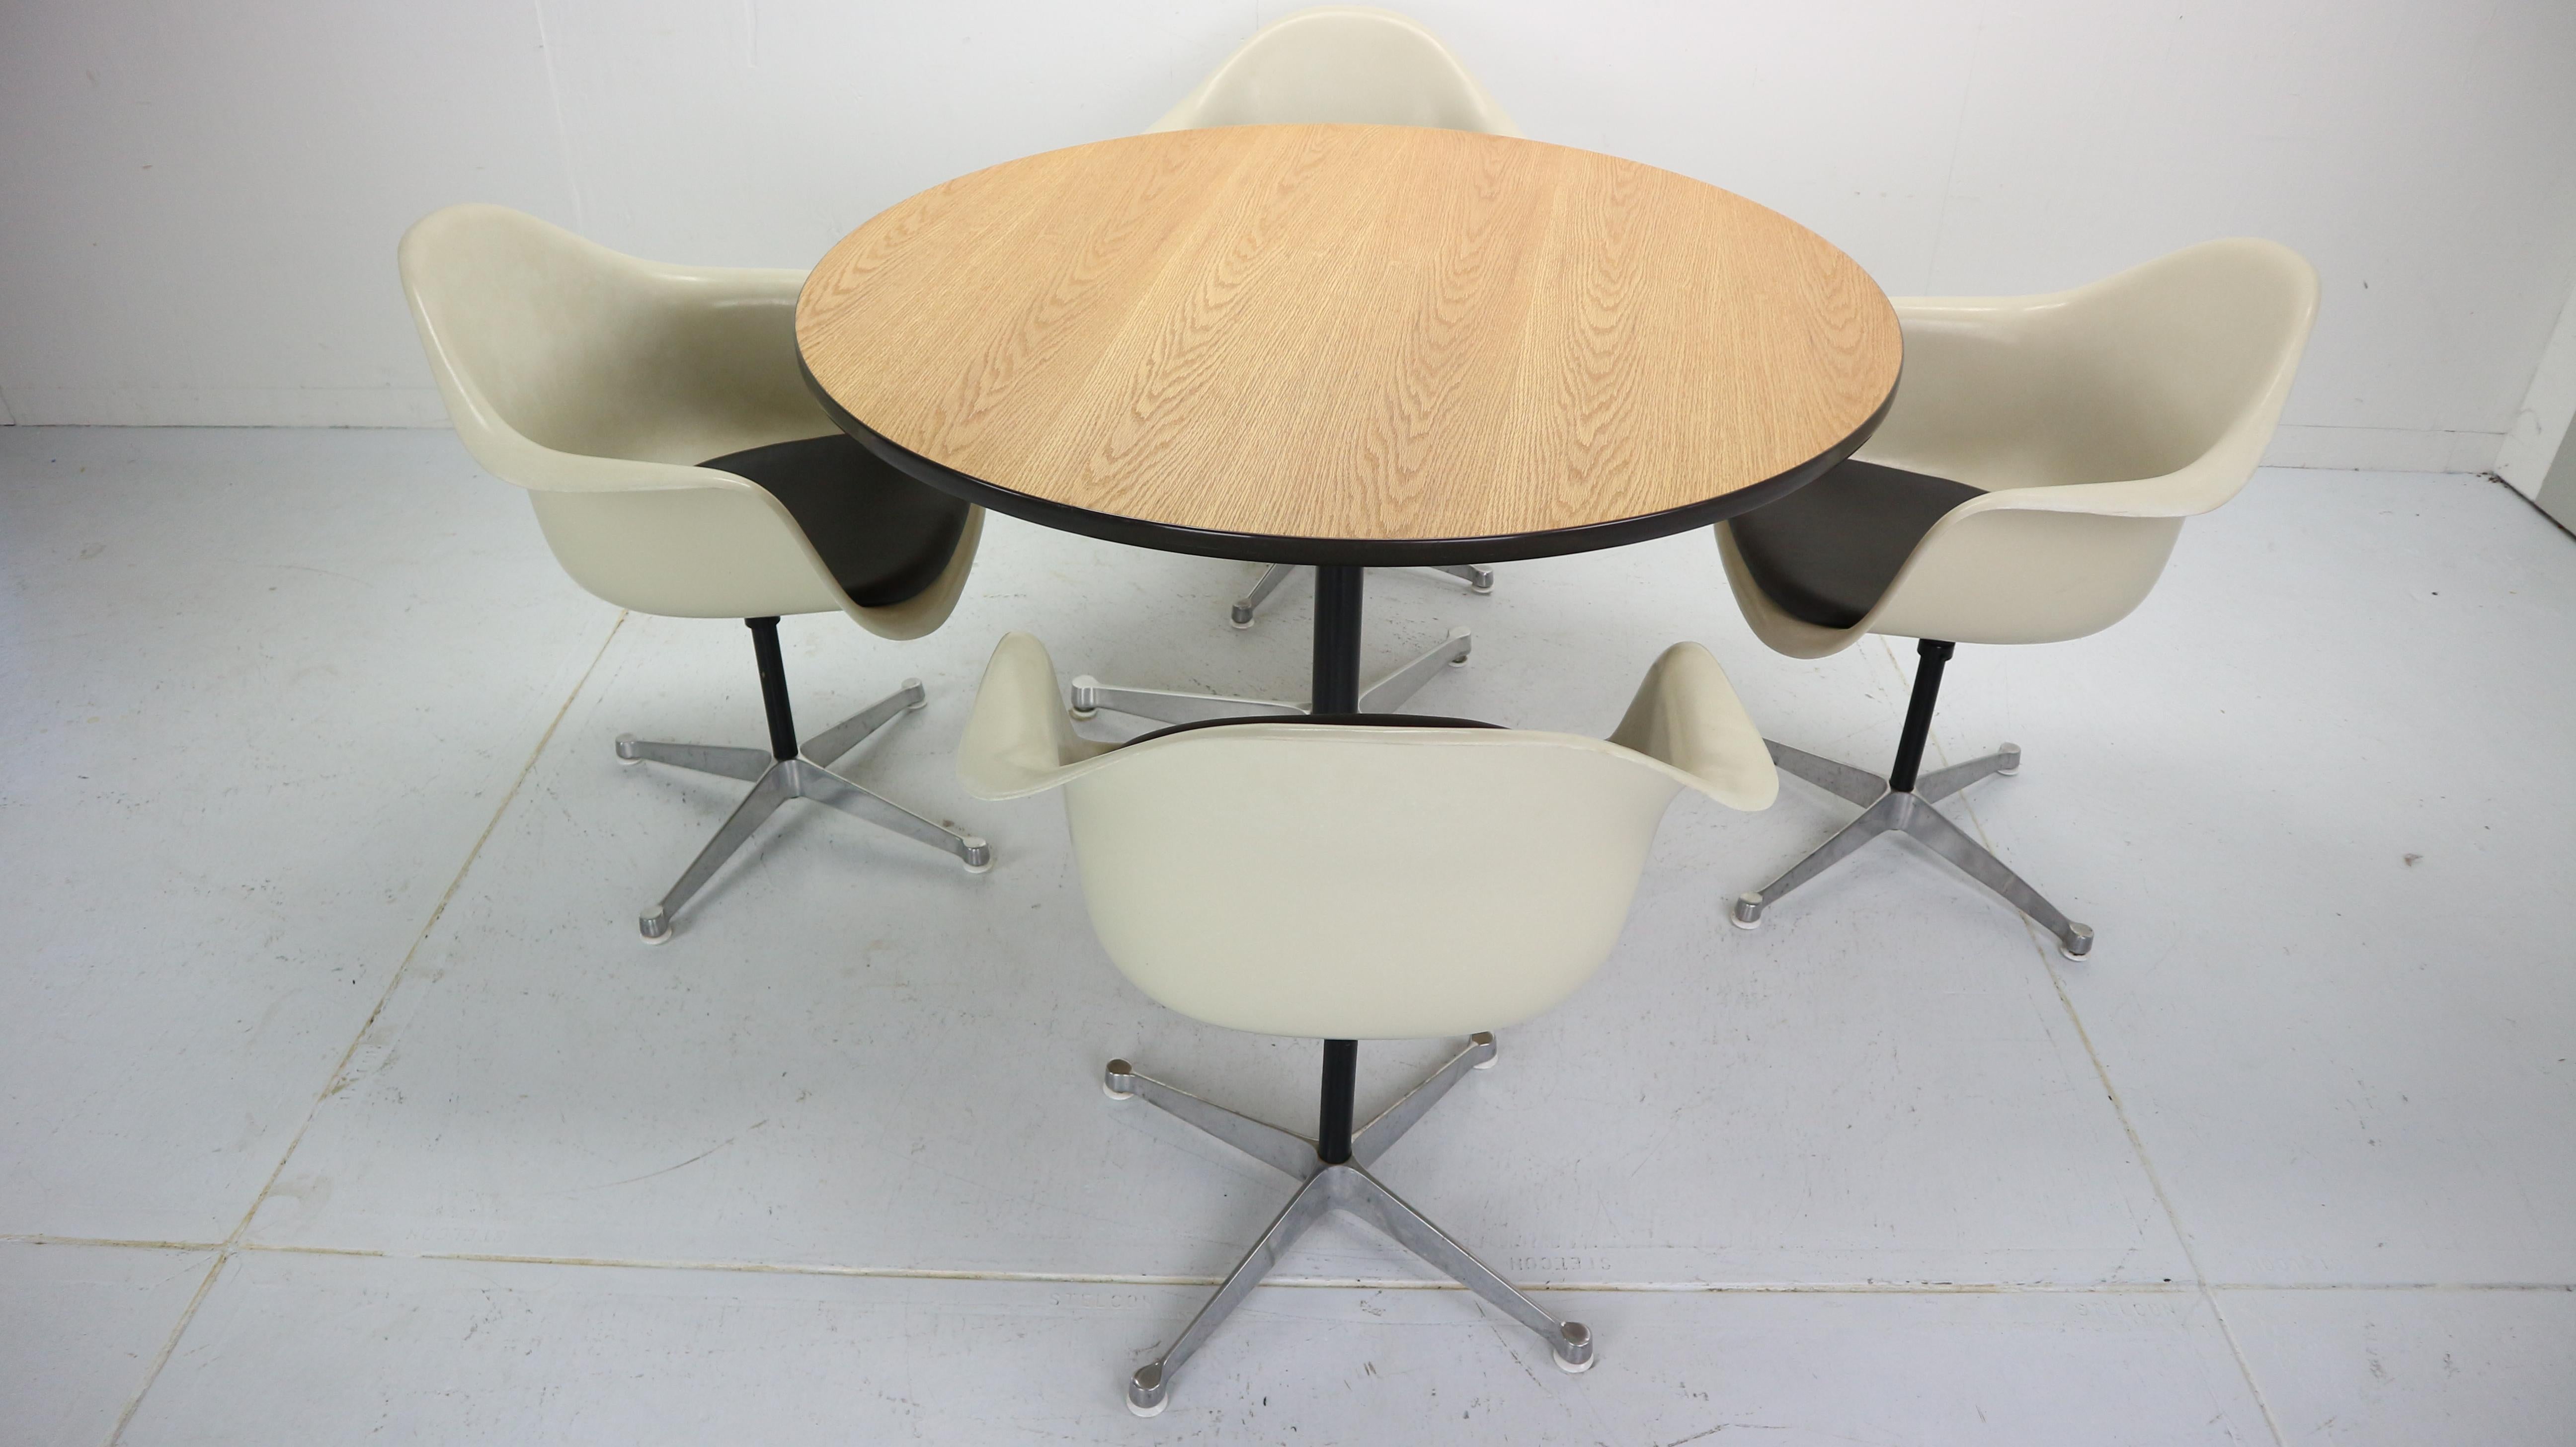 American Set of 4 Bucket Swivel Chairs & Dinning Table by Charles Eames for Herman Miller